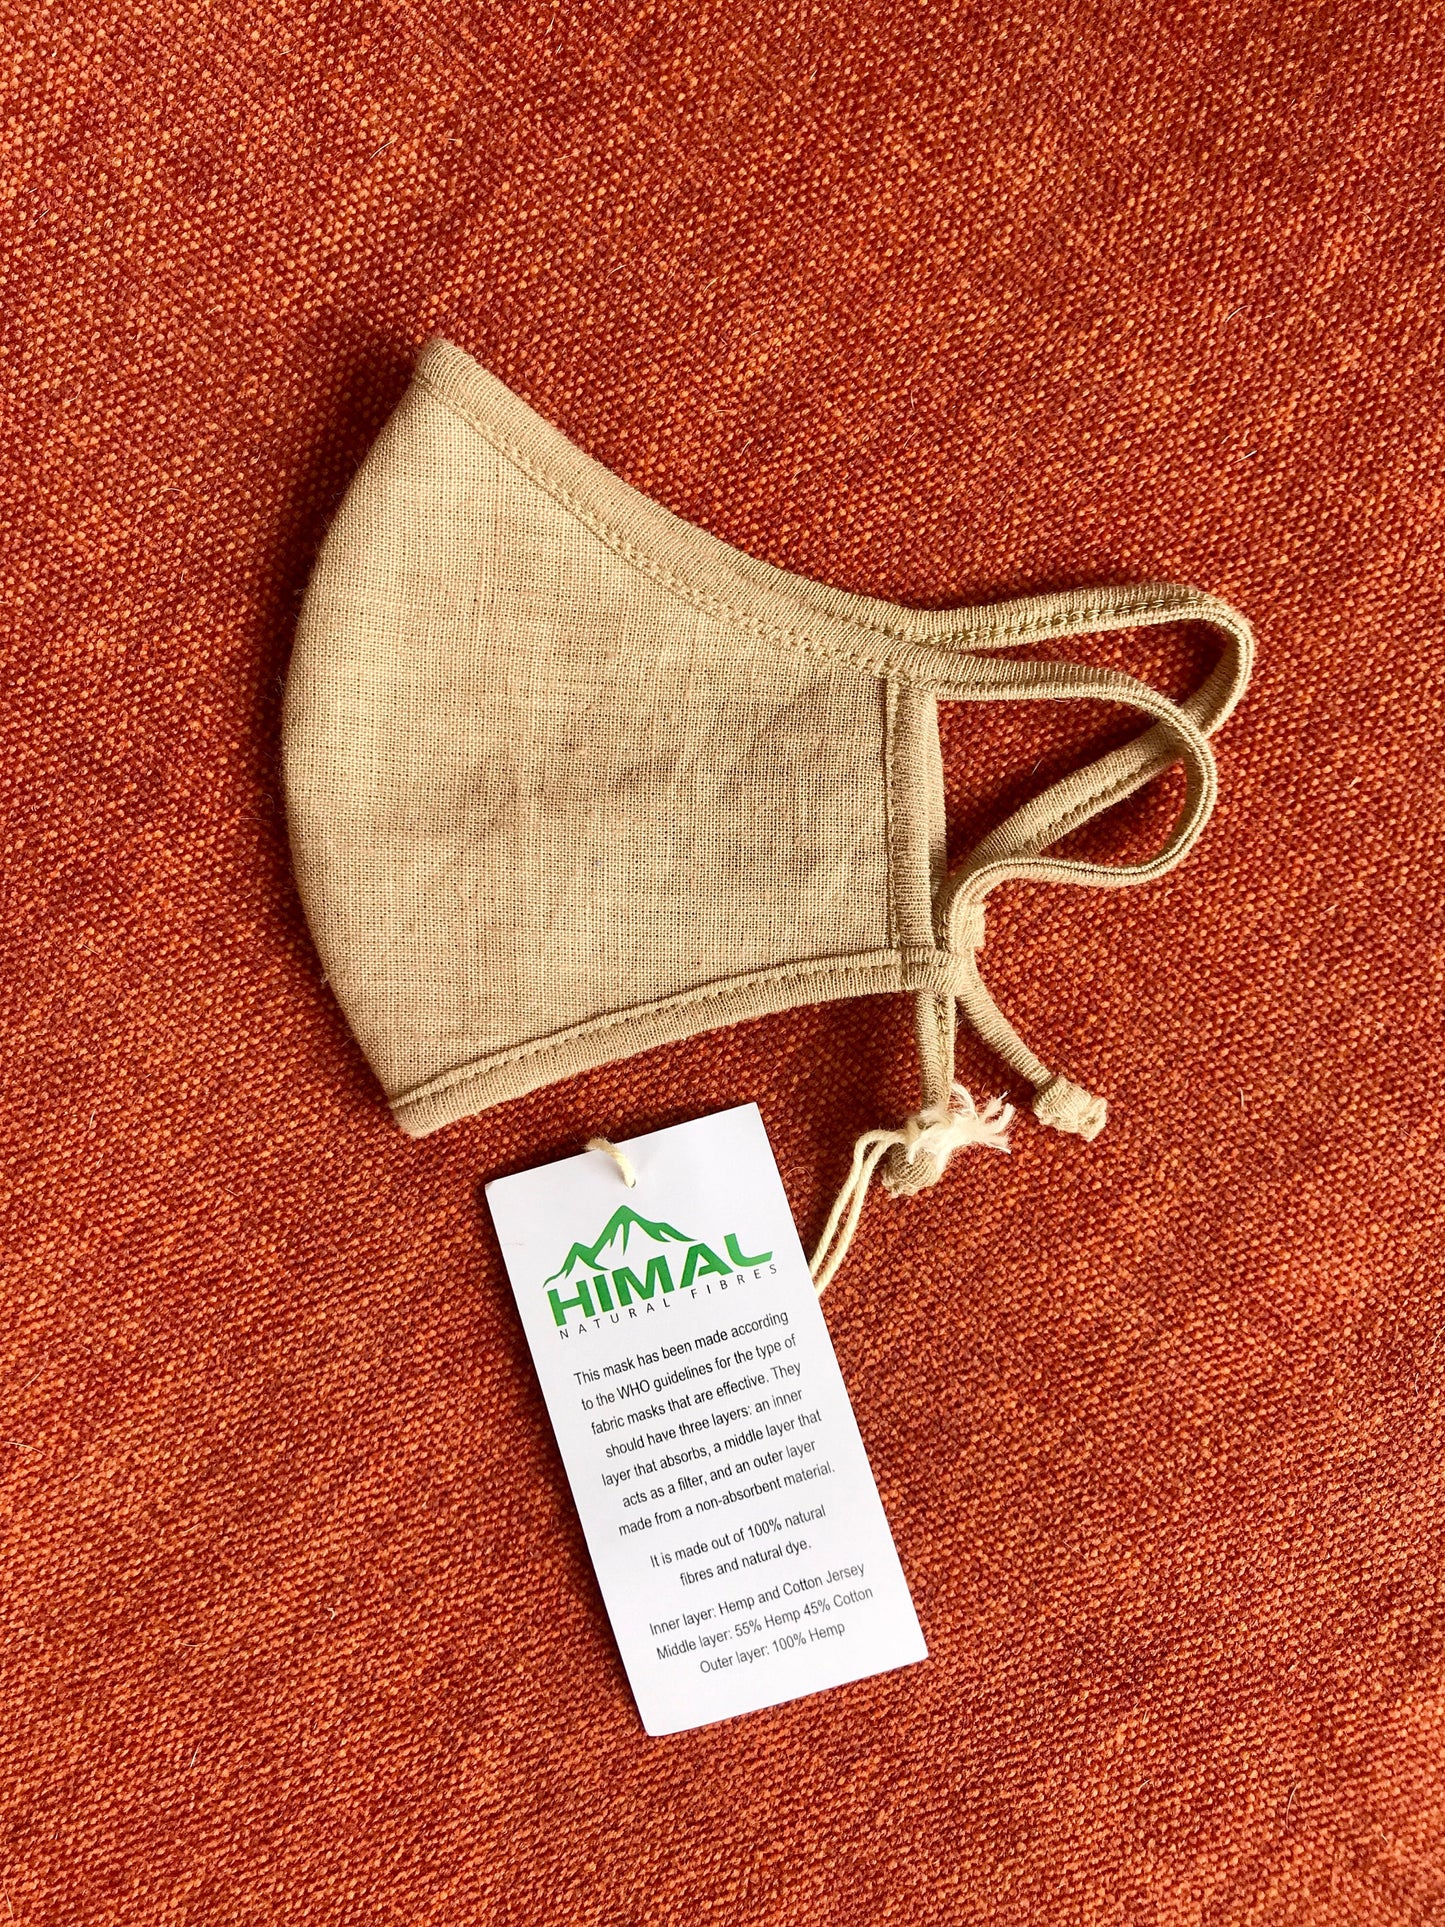 Hemp & Organic Cotton Face mask, Three Layer - Made of 100% natural fibres and natural dyes in Nepal - Blue, White, black and green